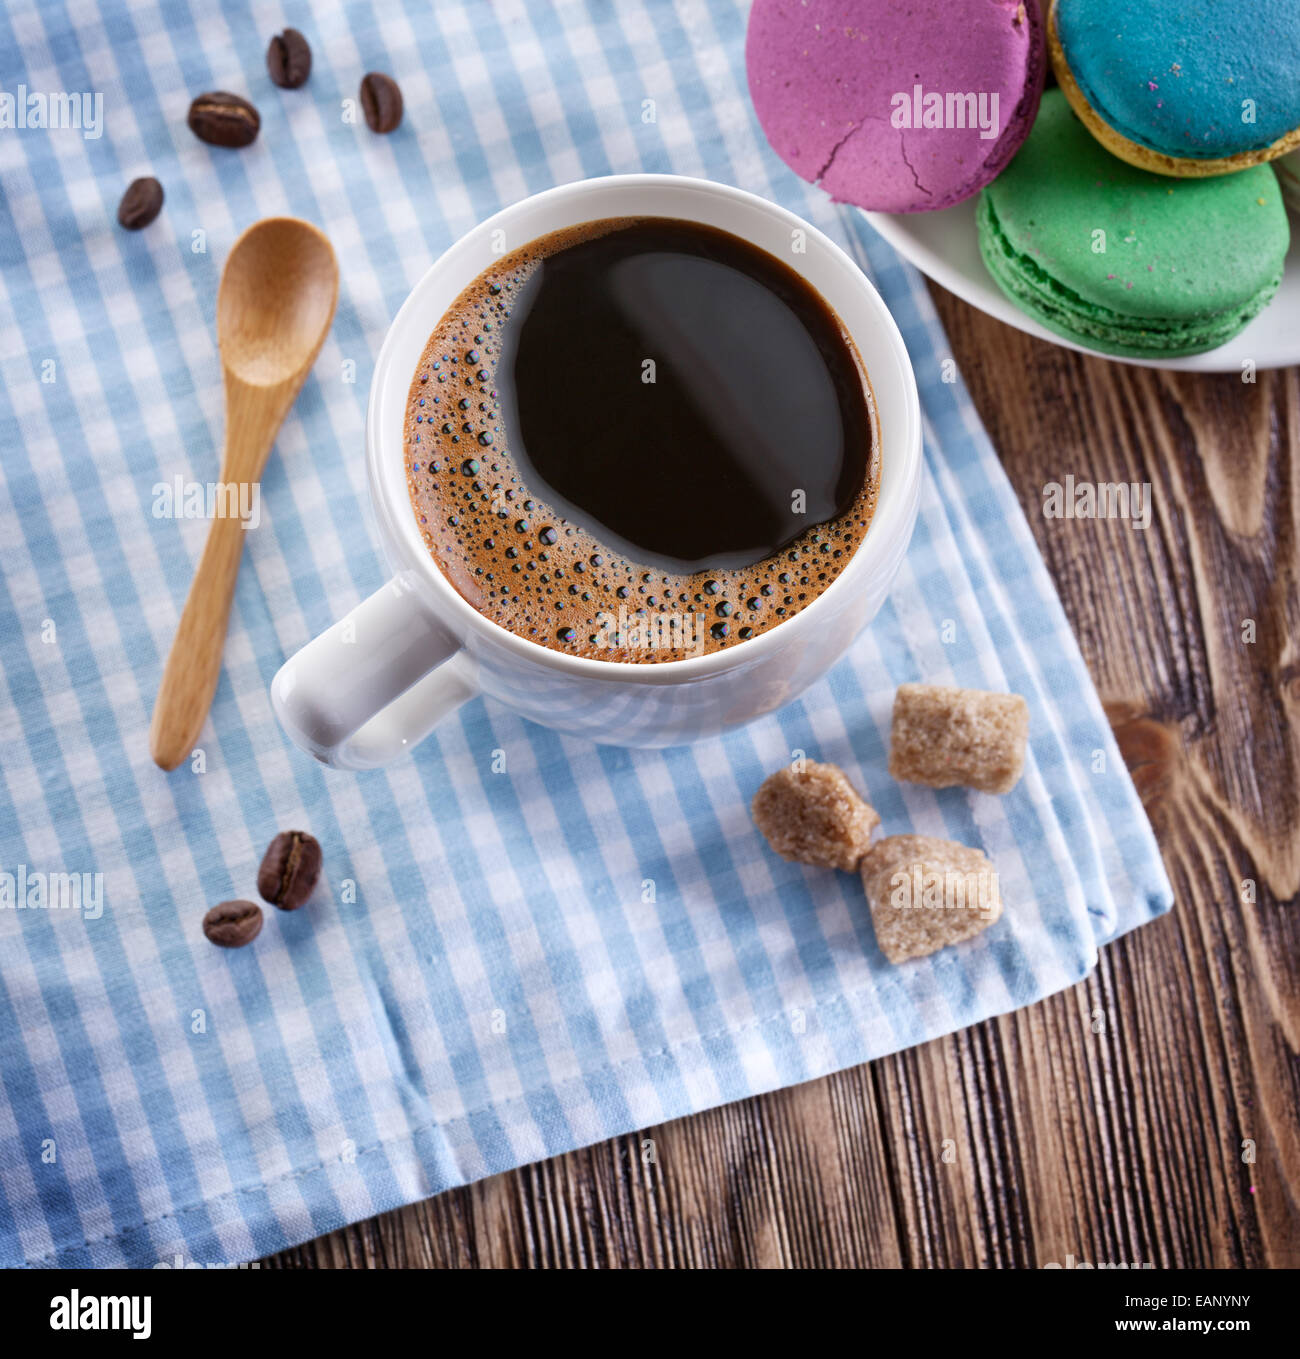 Cup of coffee and french macaron on an old wooden table. Stock Photo